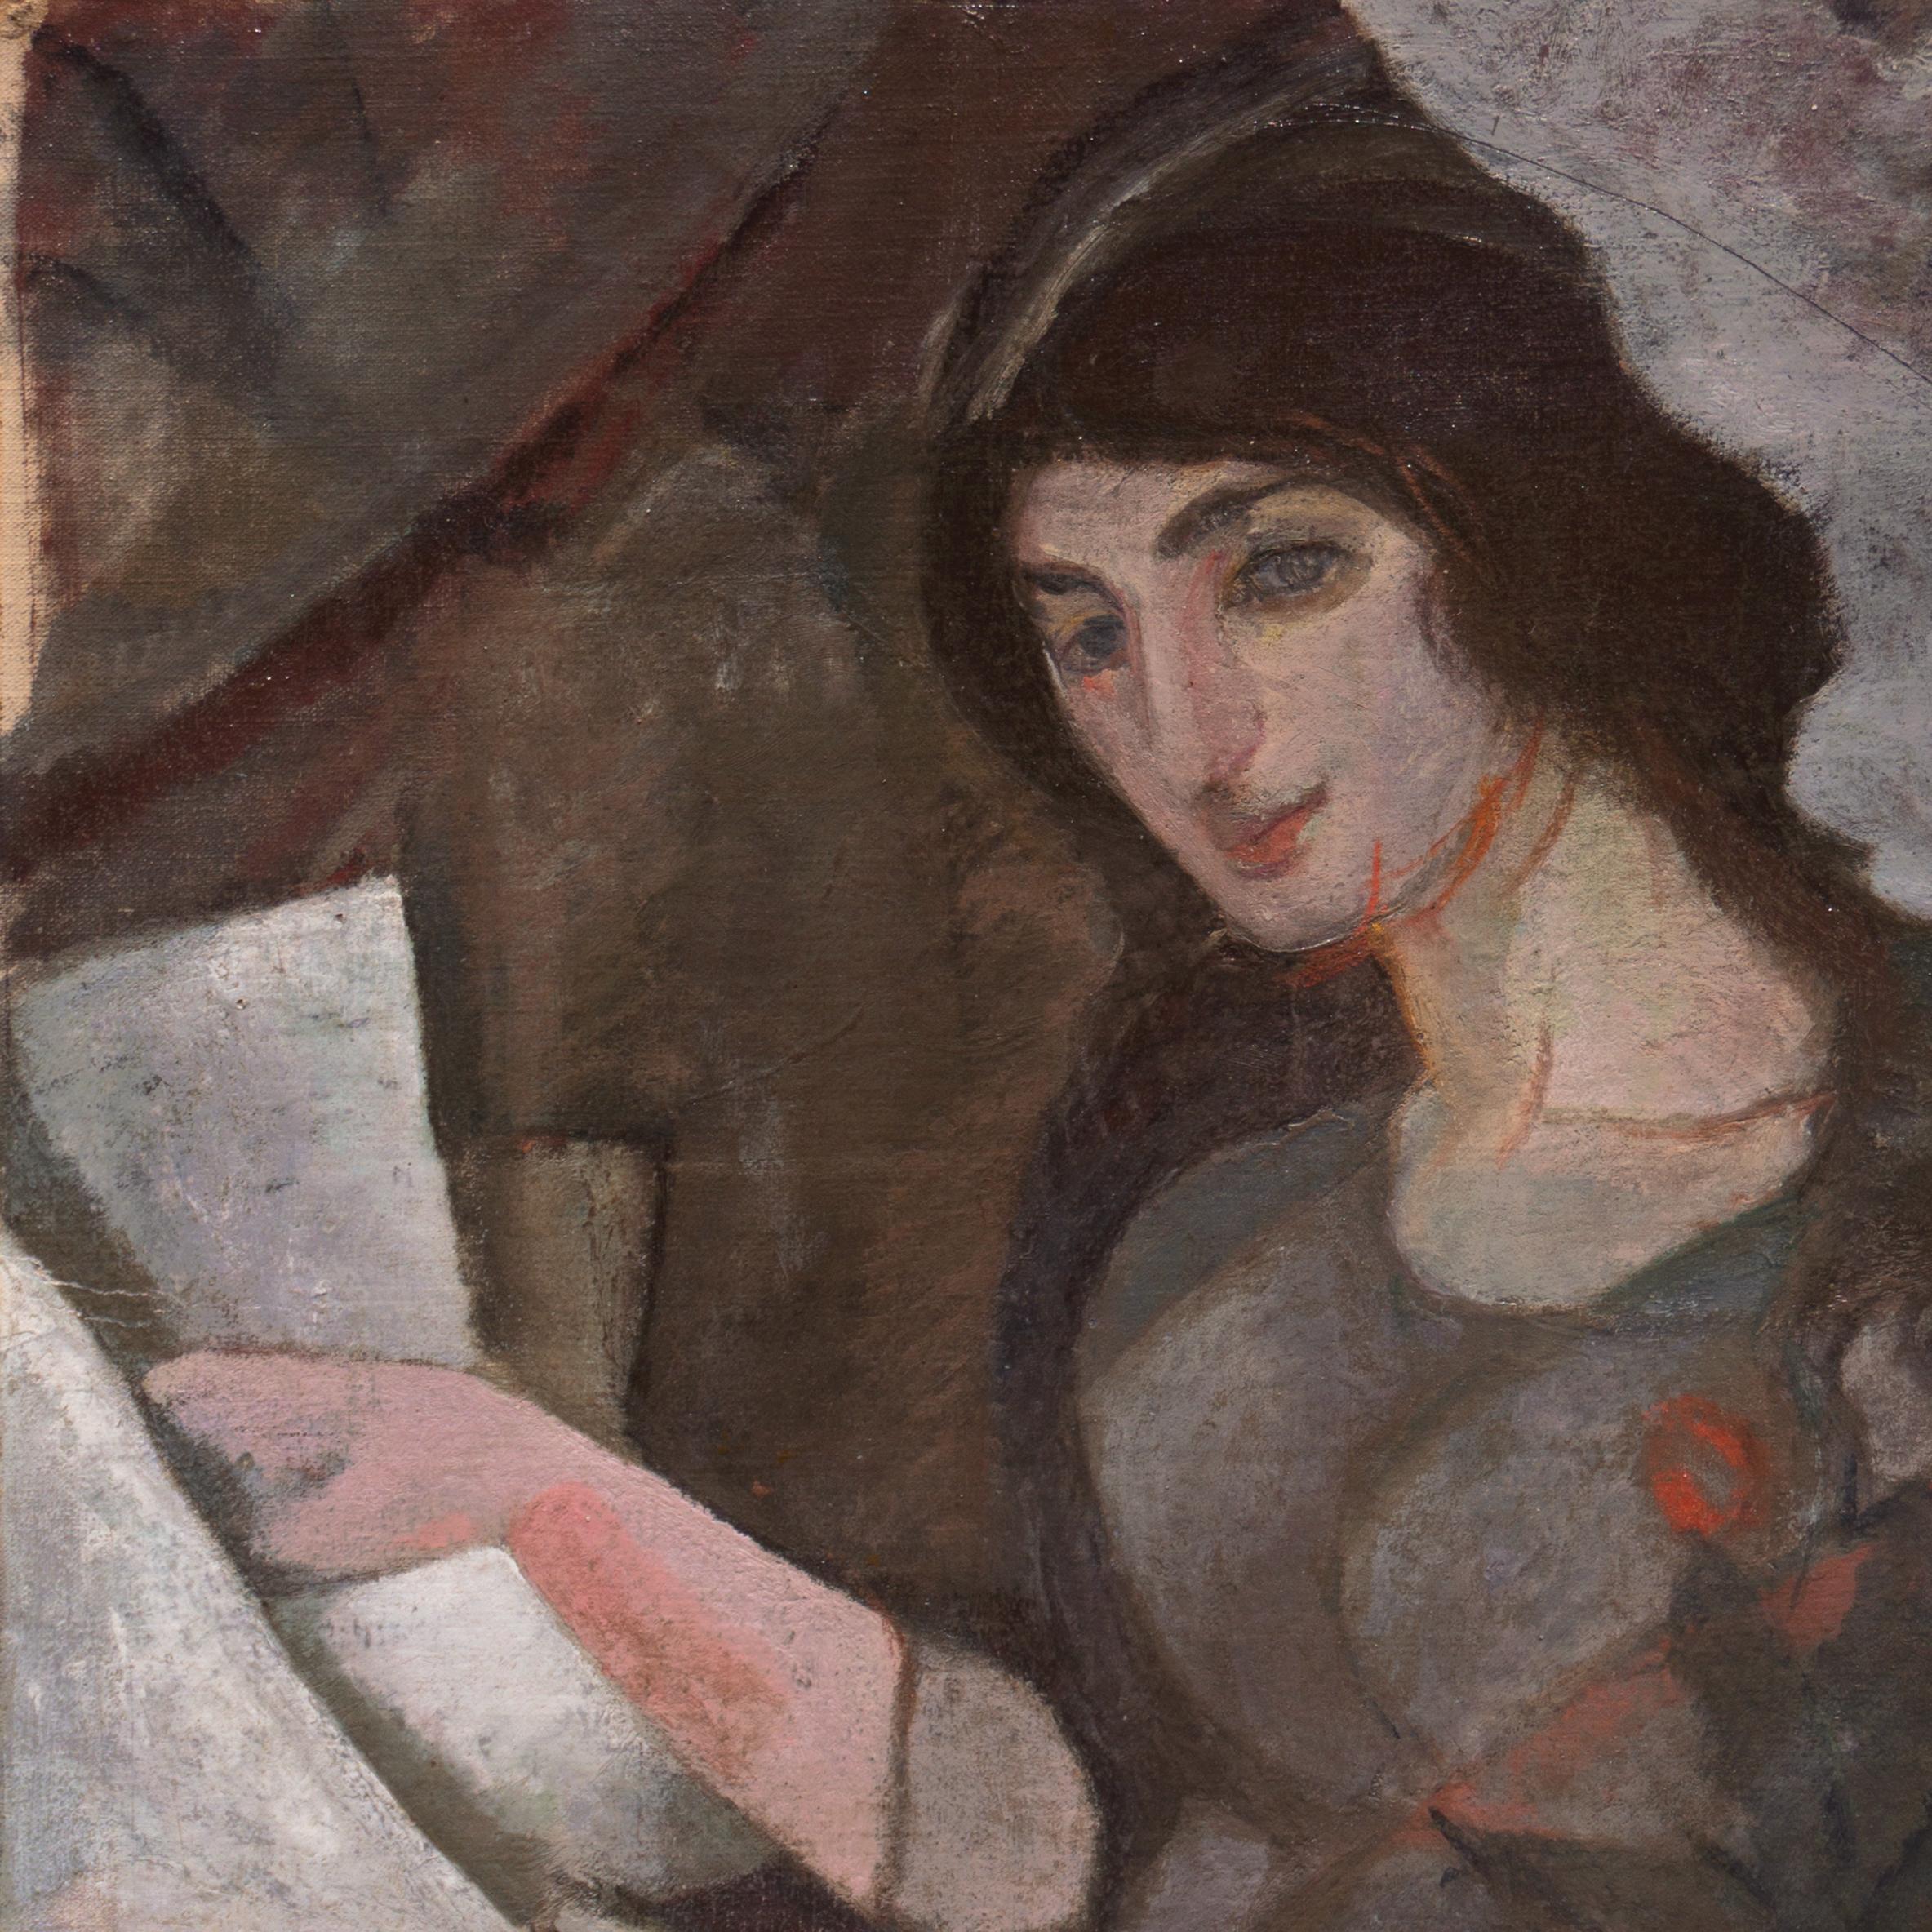 Signed center left, 'M. Vantore' for Erik Mogens Christian Vantore (Danish, 1895-1977) and painted circa 1915.

A dramatic, early twentieth-century, Cubist-derived figural oil of a young woman seated next to a violin and shown arranging music